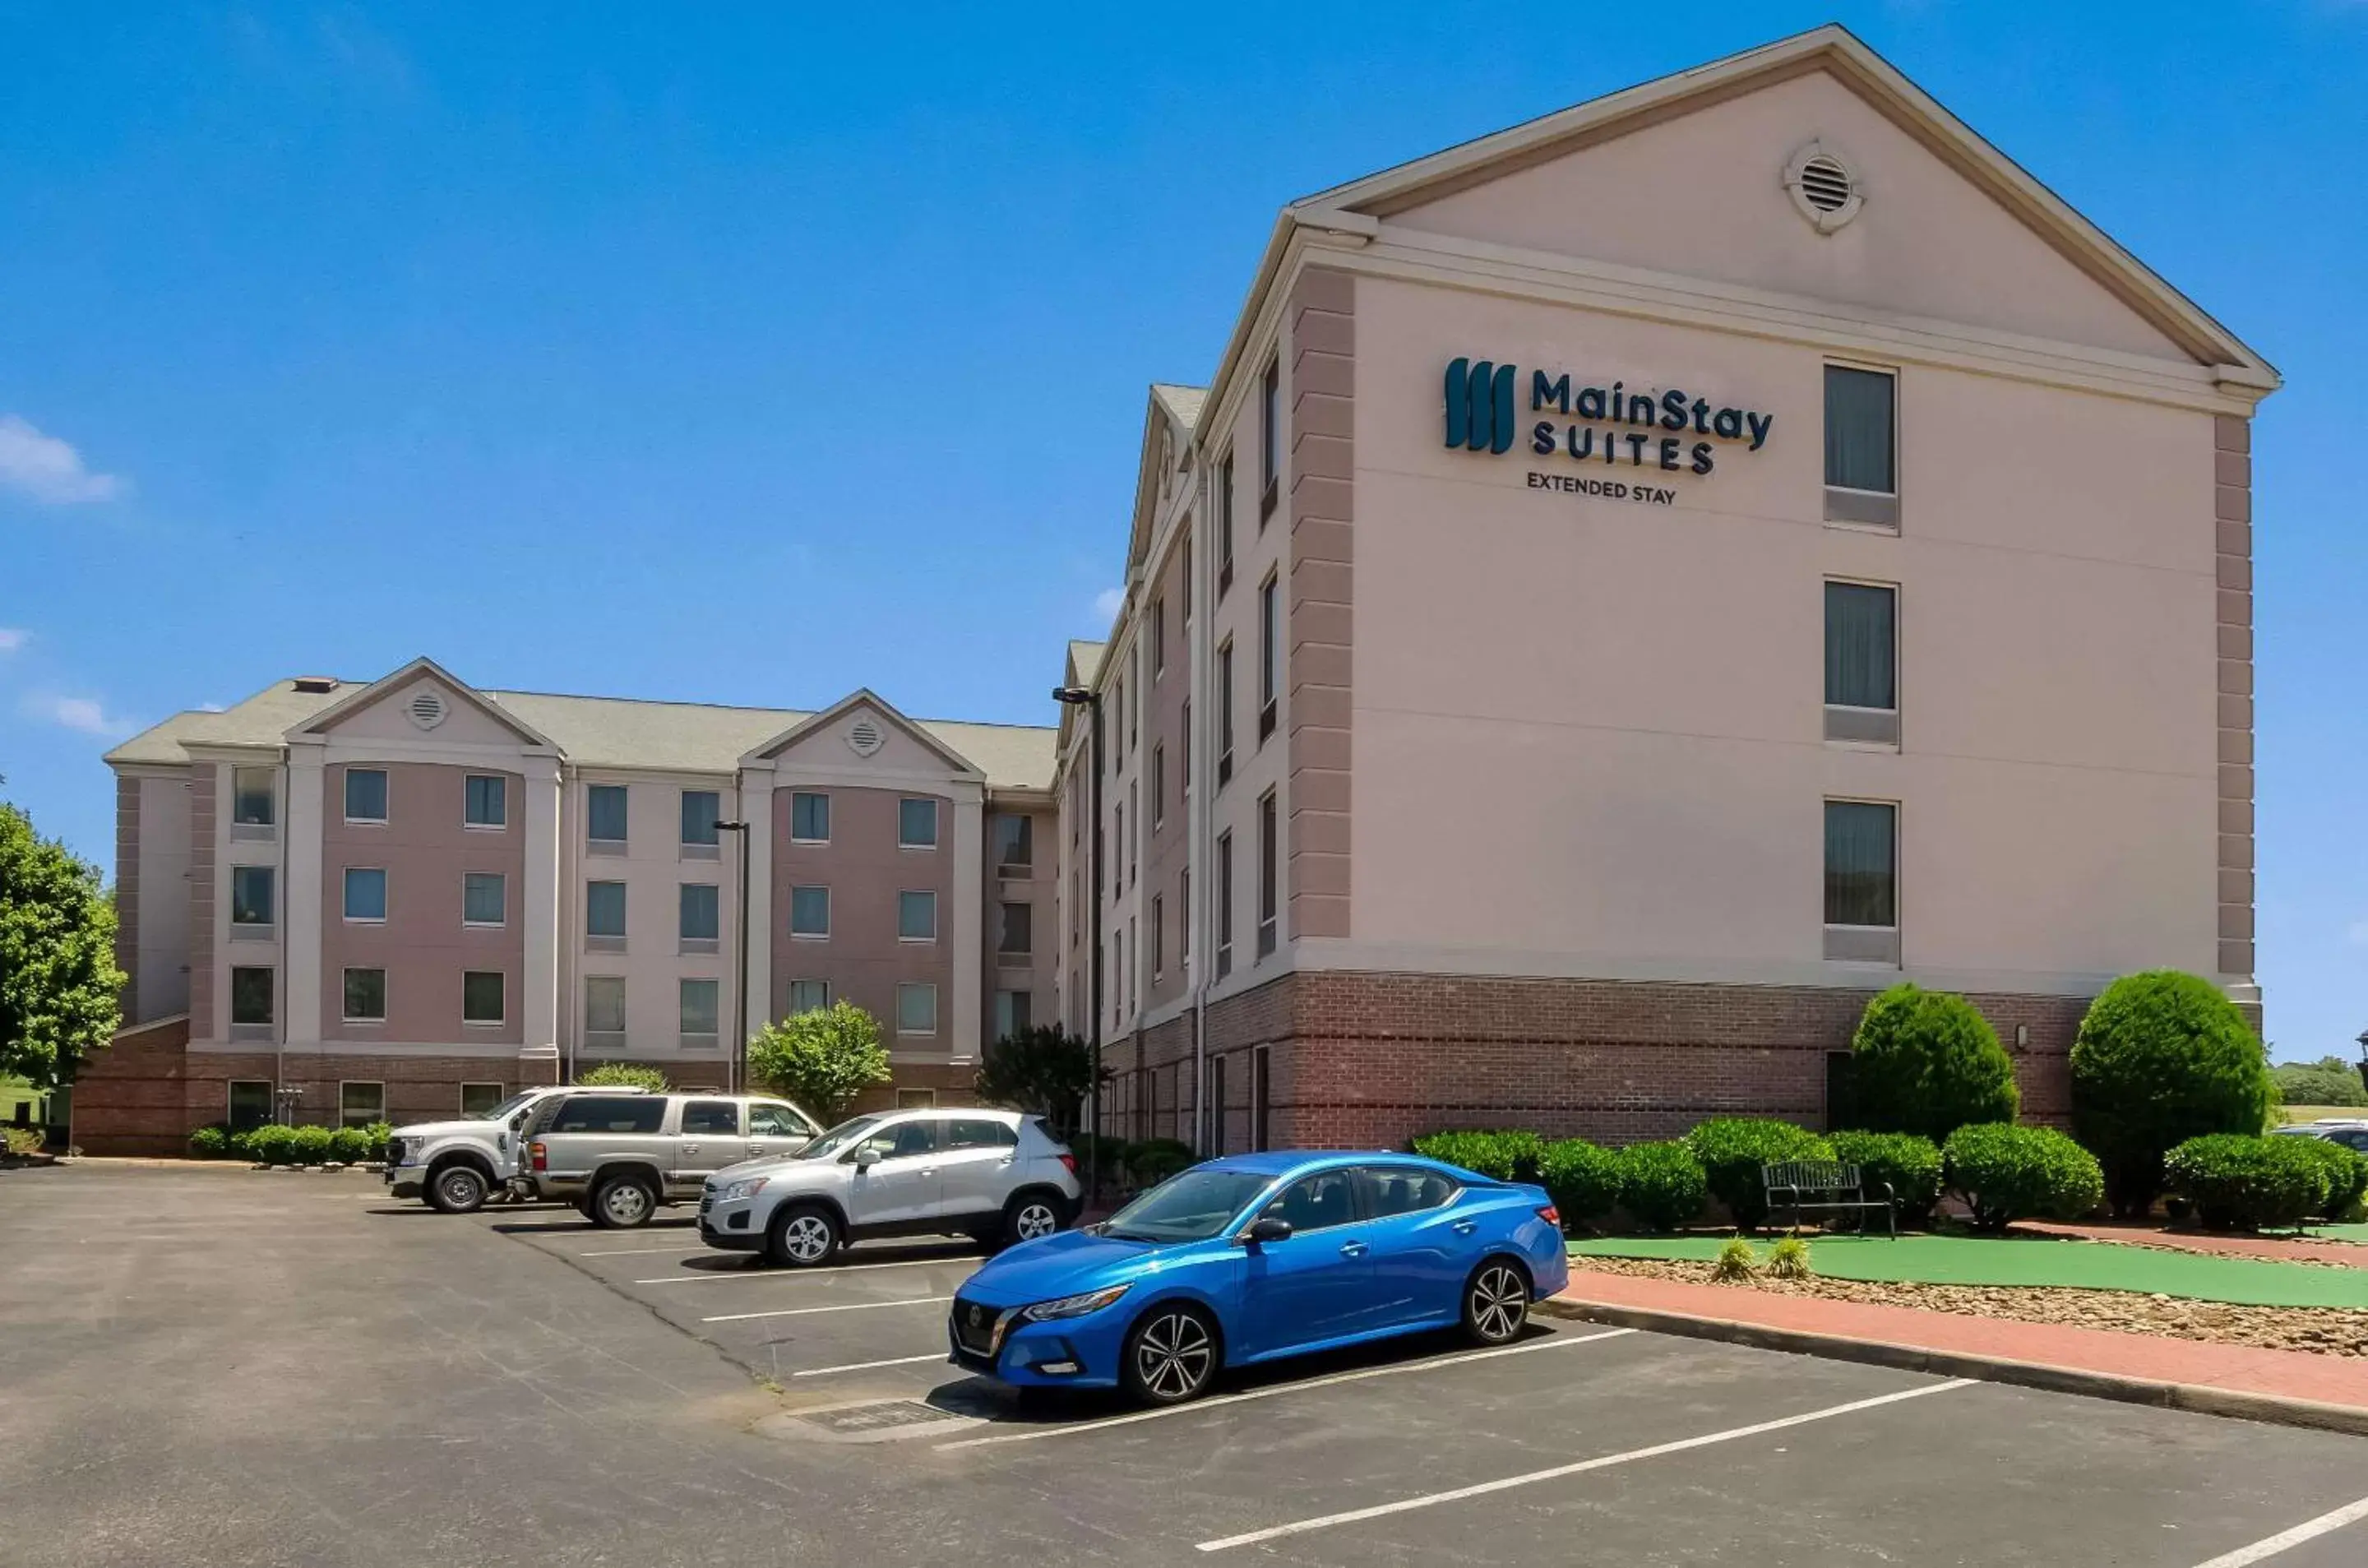 Property Building in MainStay Suites Airport